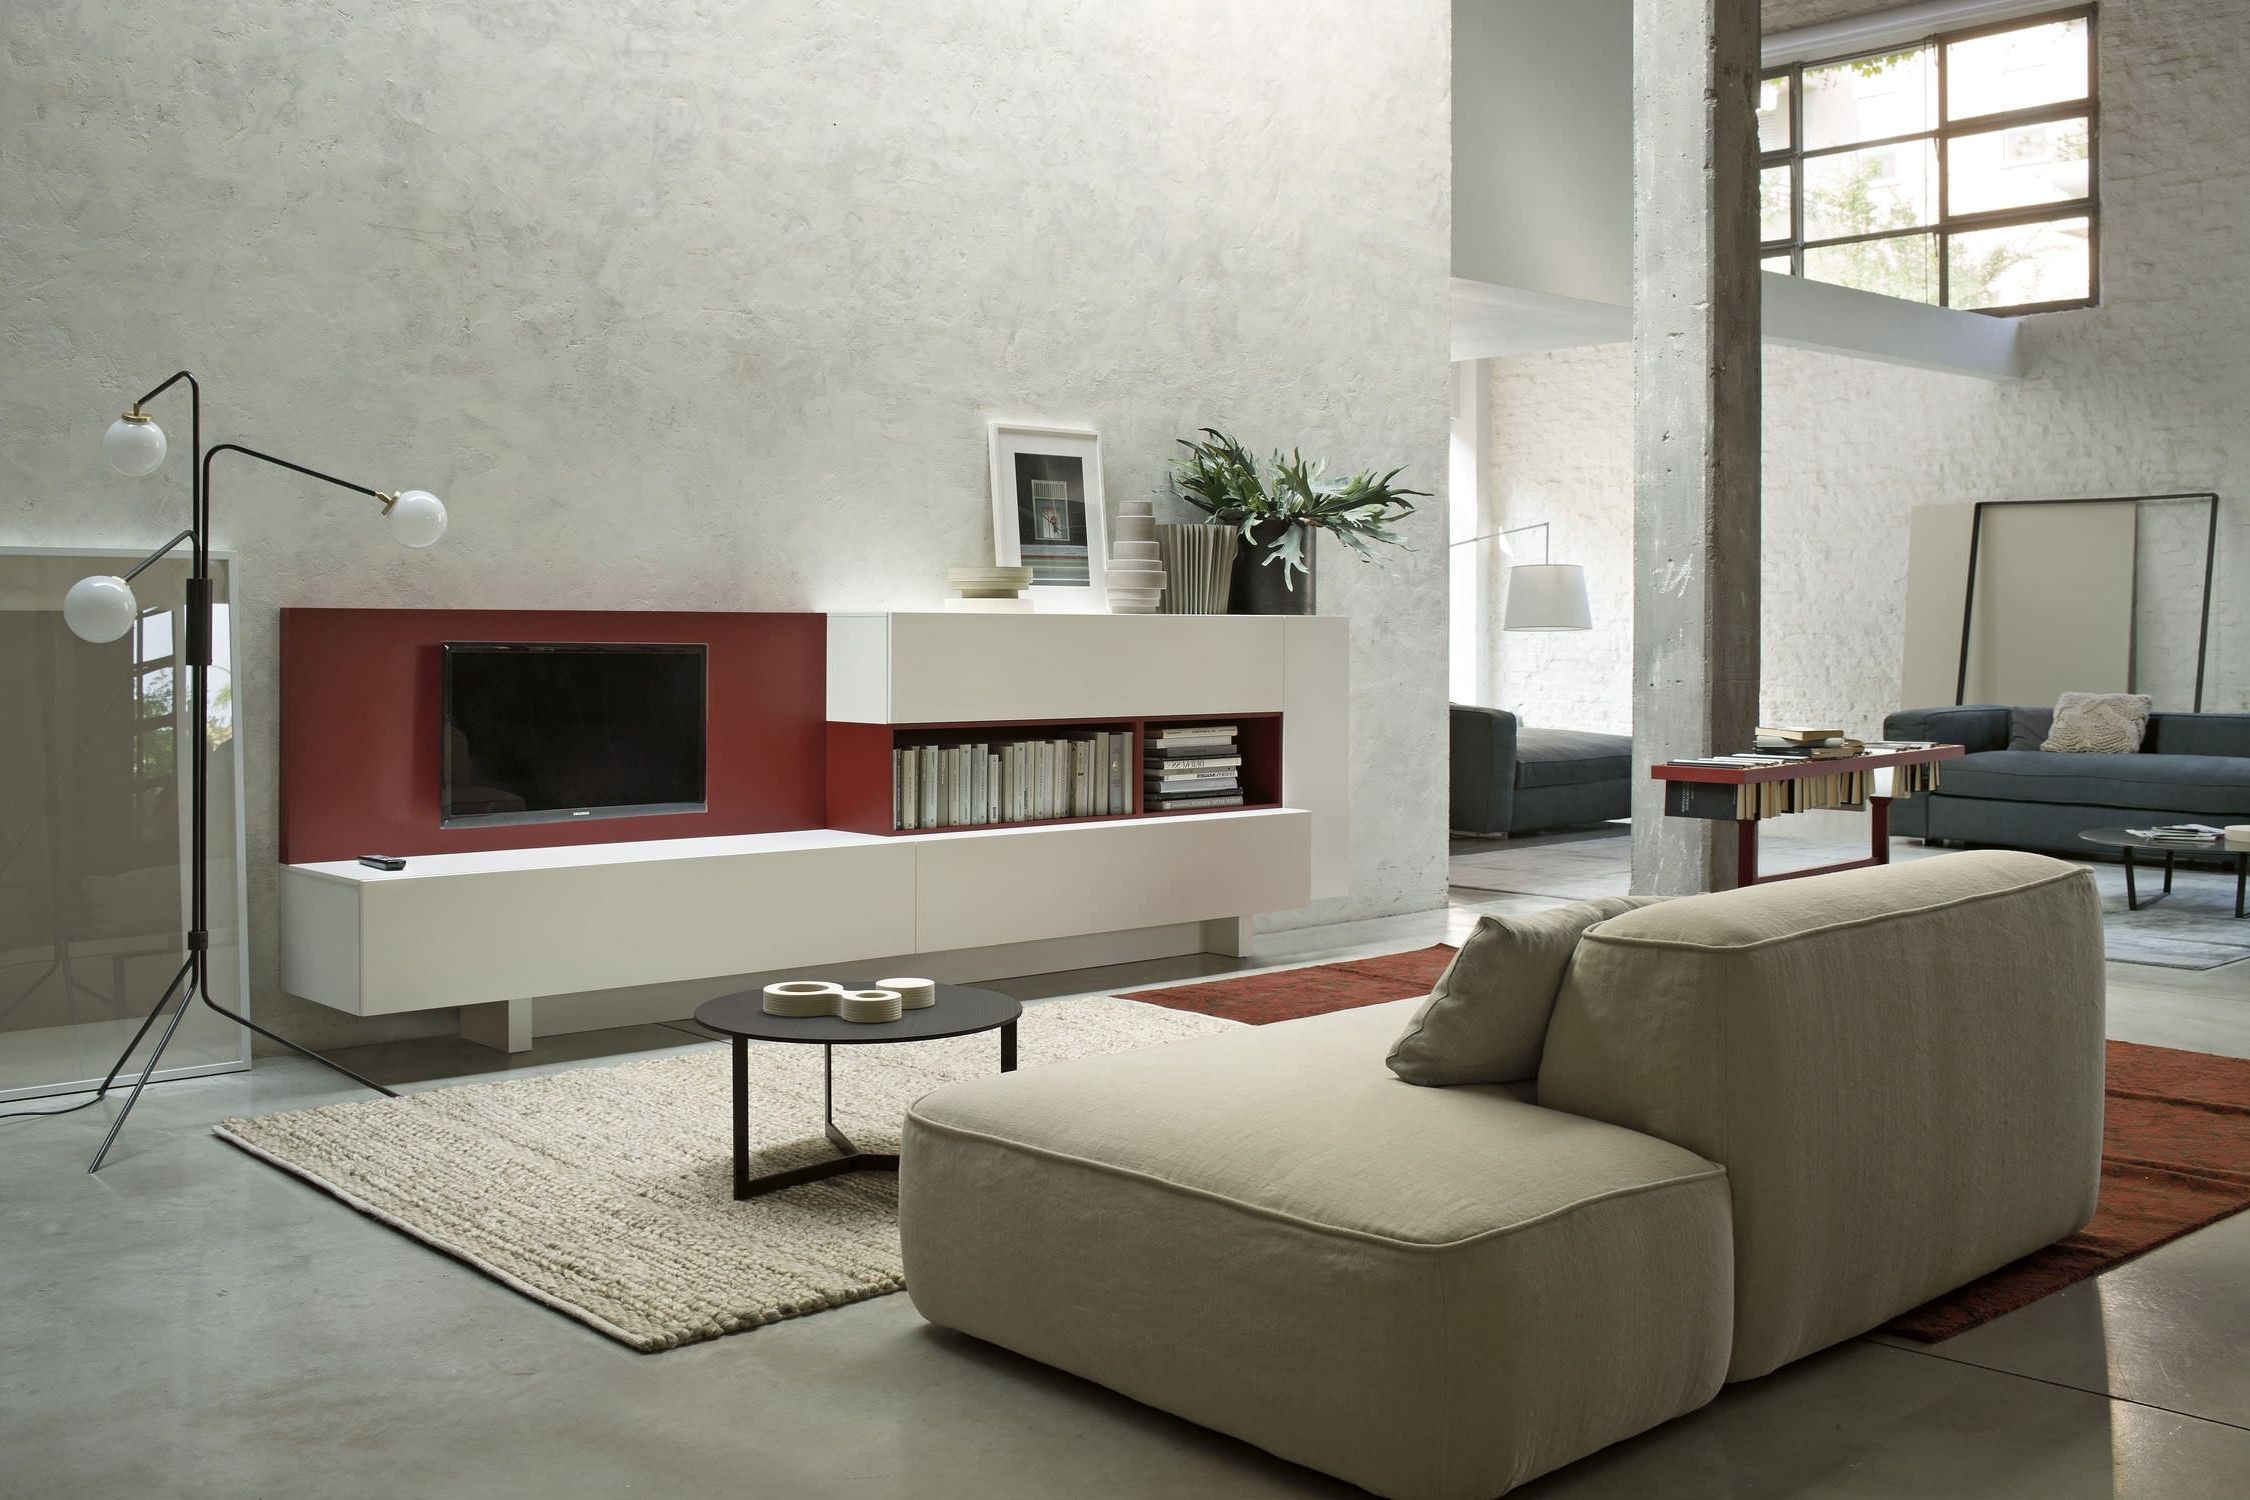 2019 Furniture : Corner Sofa Kuwait Sectional Couch El Paso Sectional Pertaining To Kijiji Ottawa Sectional Sofas (View 8 of 20)